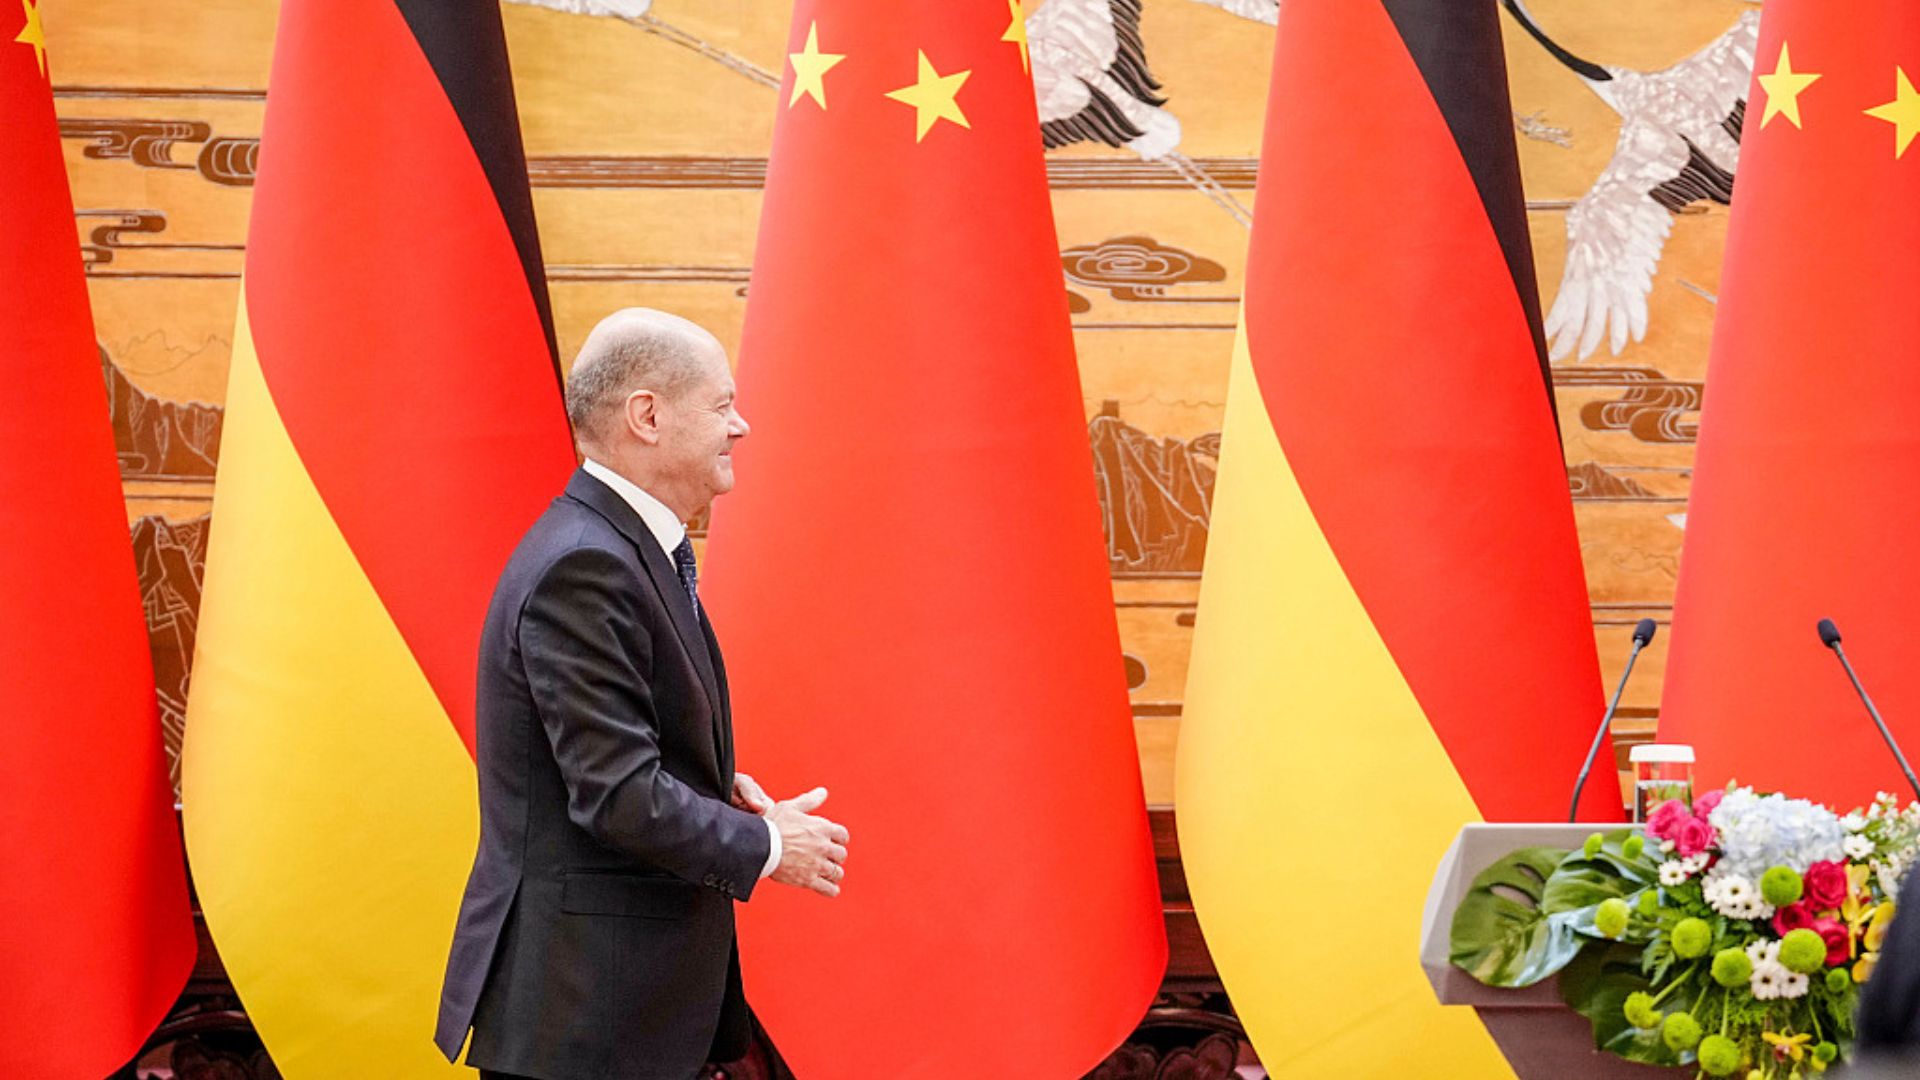 Scholz leaves a news conference in the Hebei Hall of the Great Hall of the People during his last trip to China. /Kay Nietfeld/picture-alliance/dpa/AP